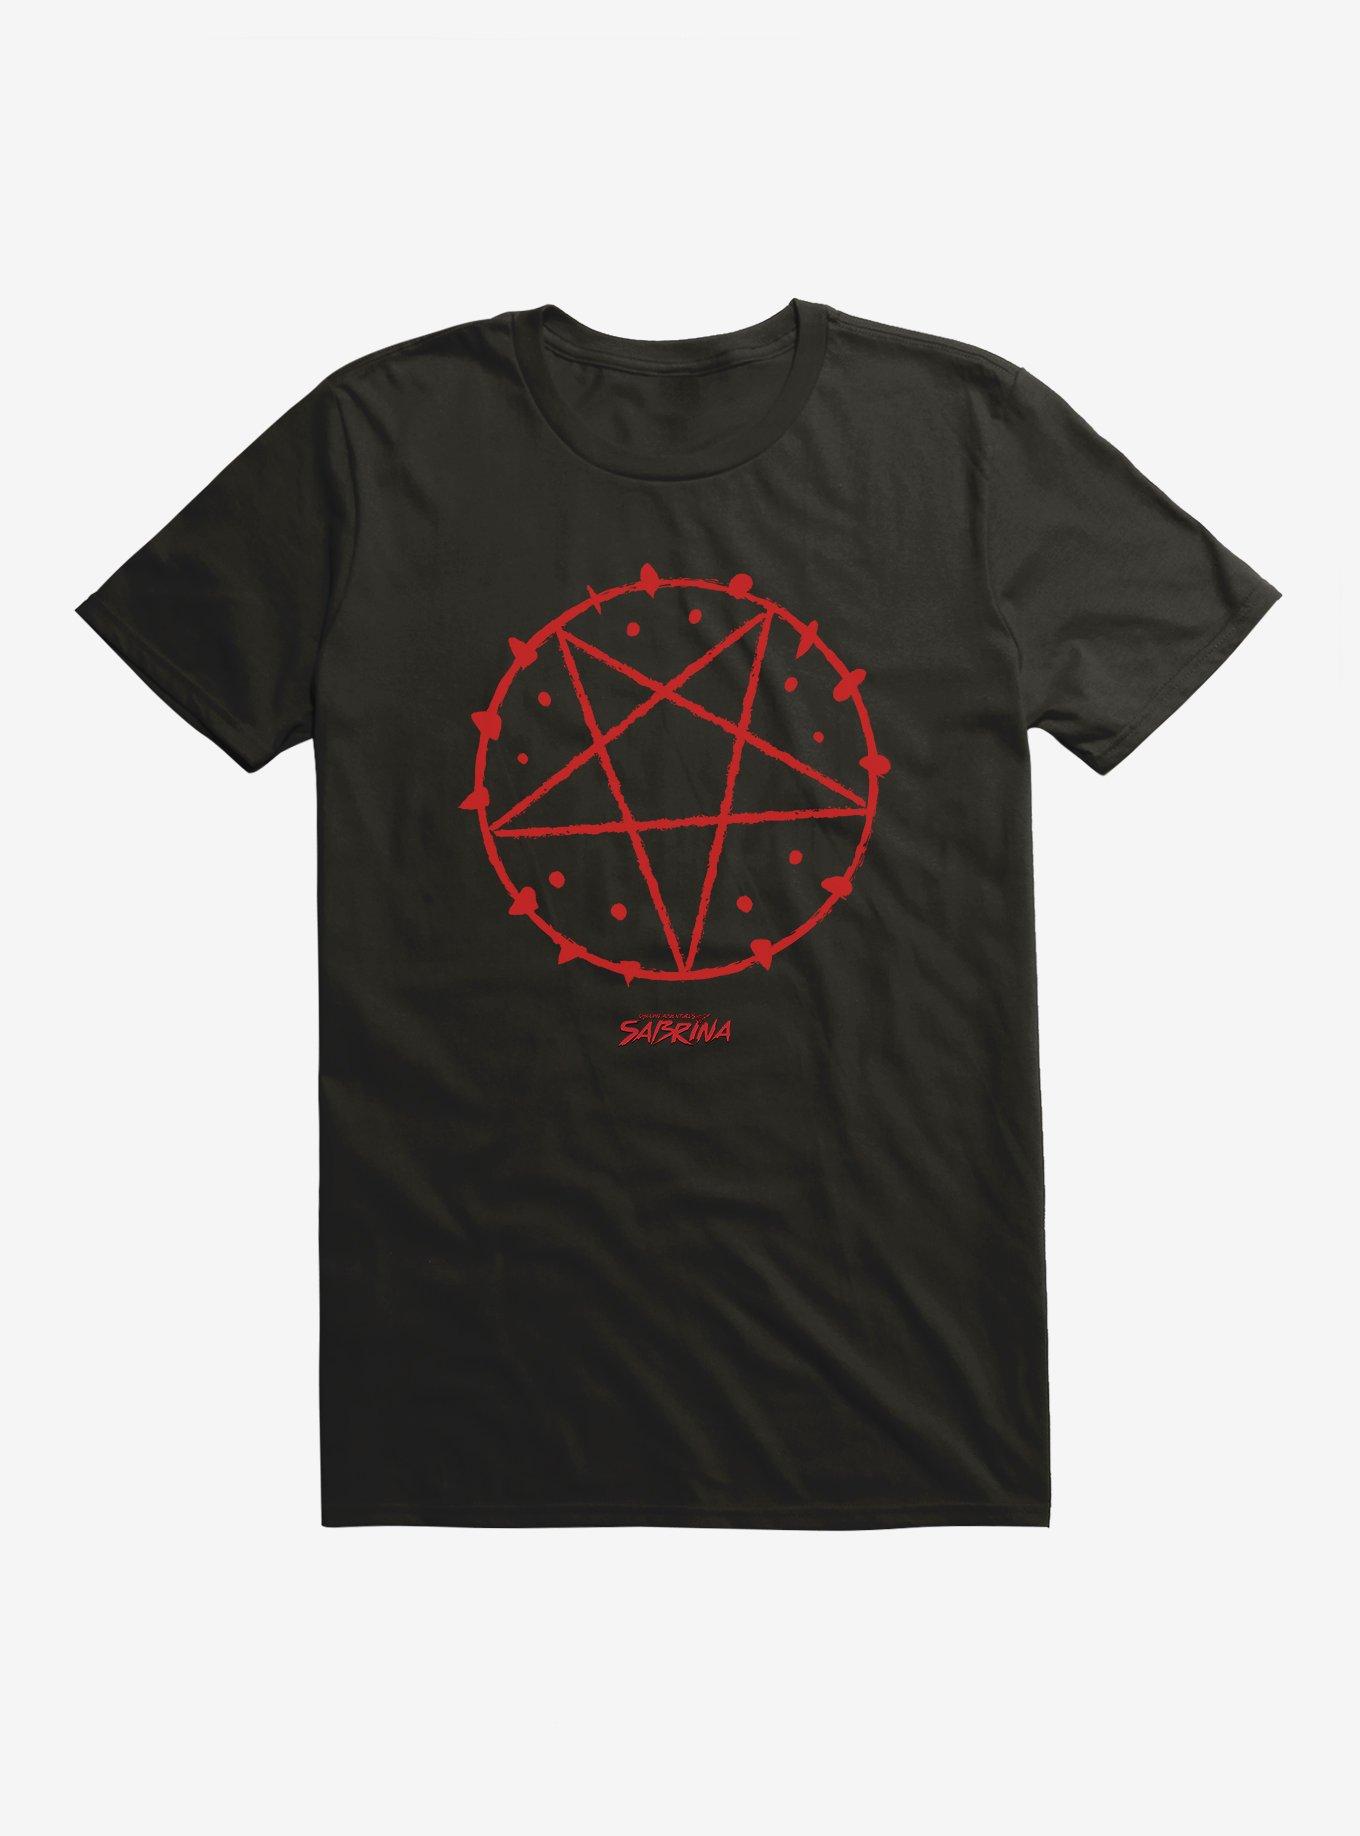 Chilling Adventures Of Sabrina Red Pentagram T-Shirt | Hot Topic